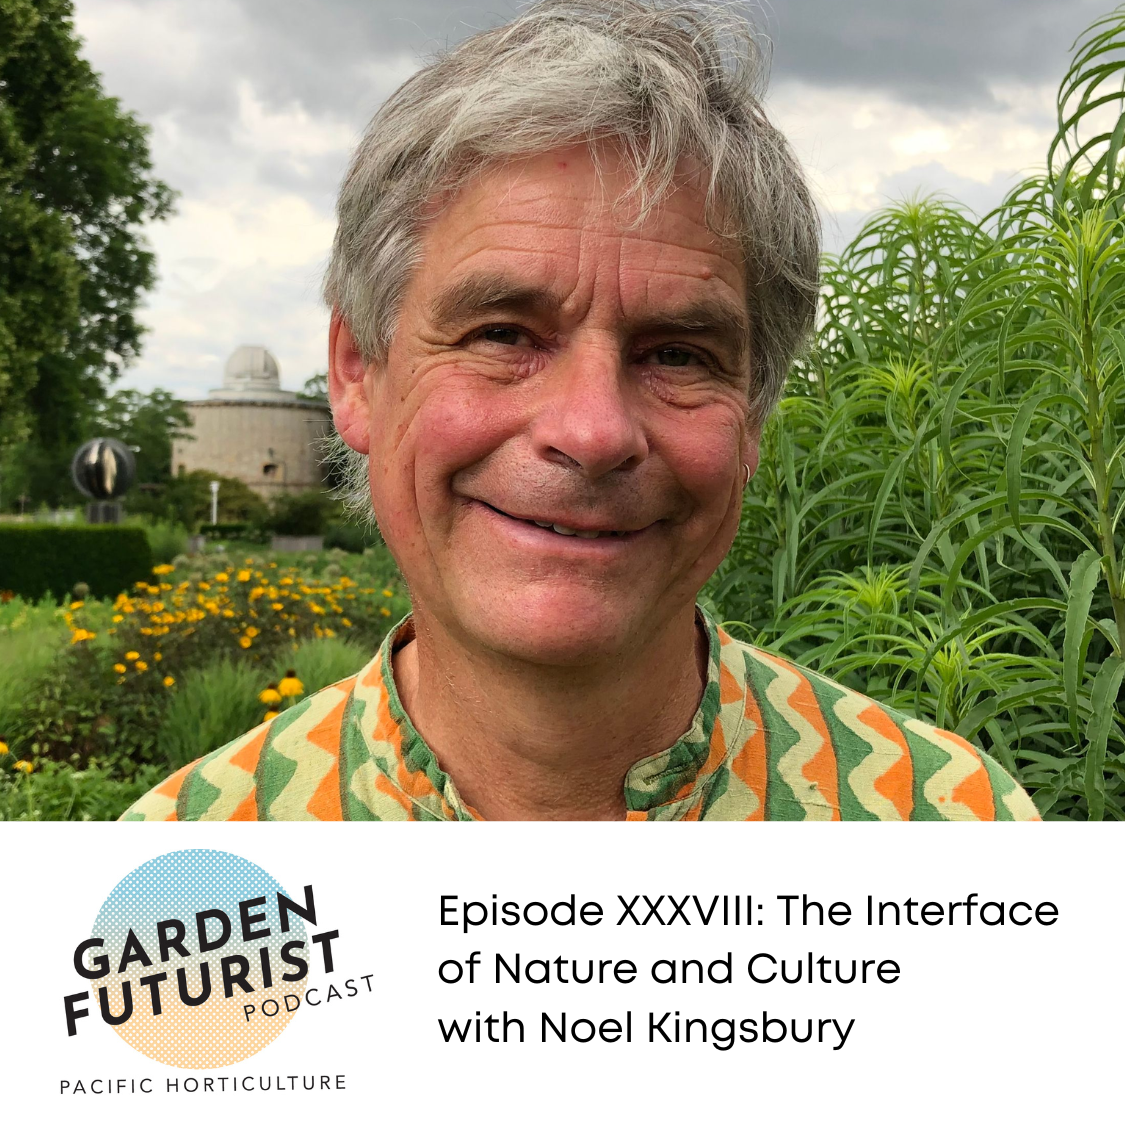 Episode XXXVIII: The Interface of Nature and Culture with Noel Kingsbury